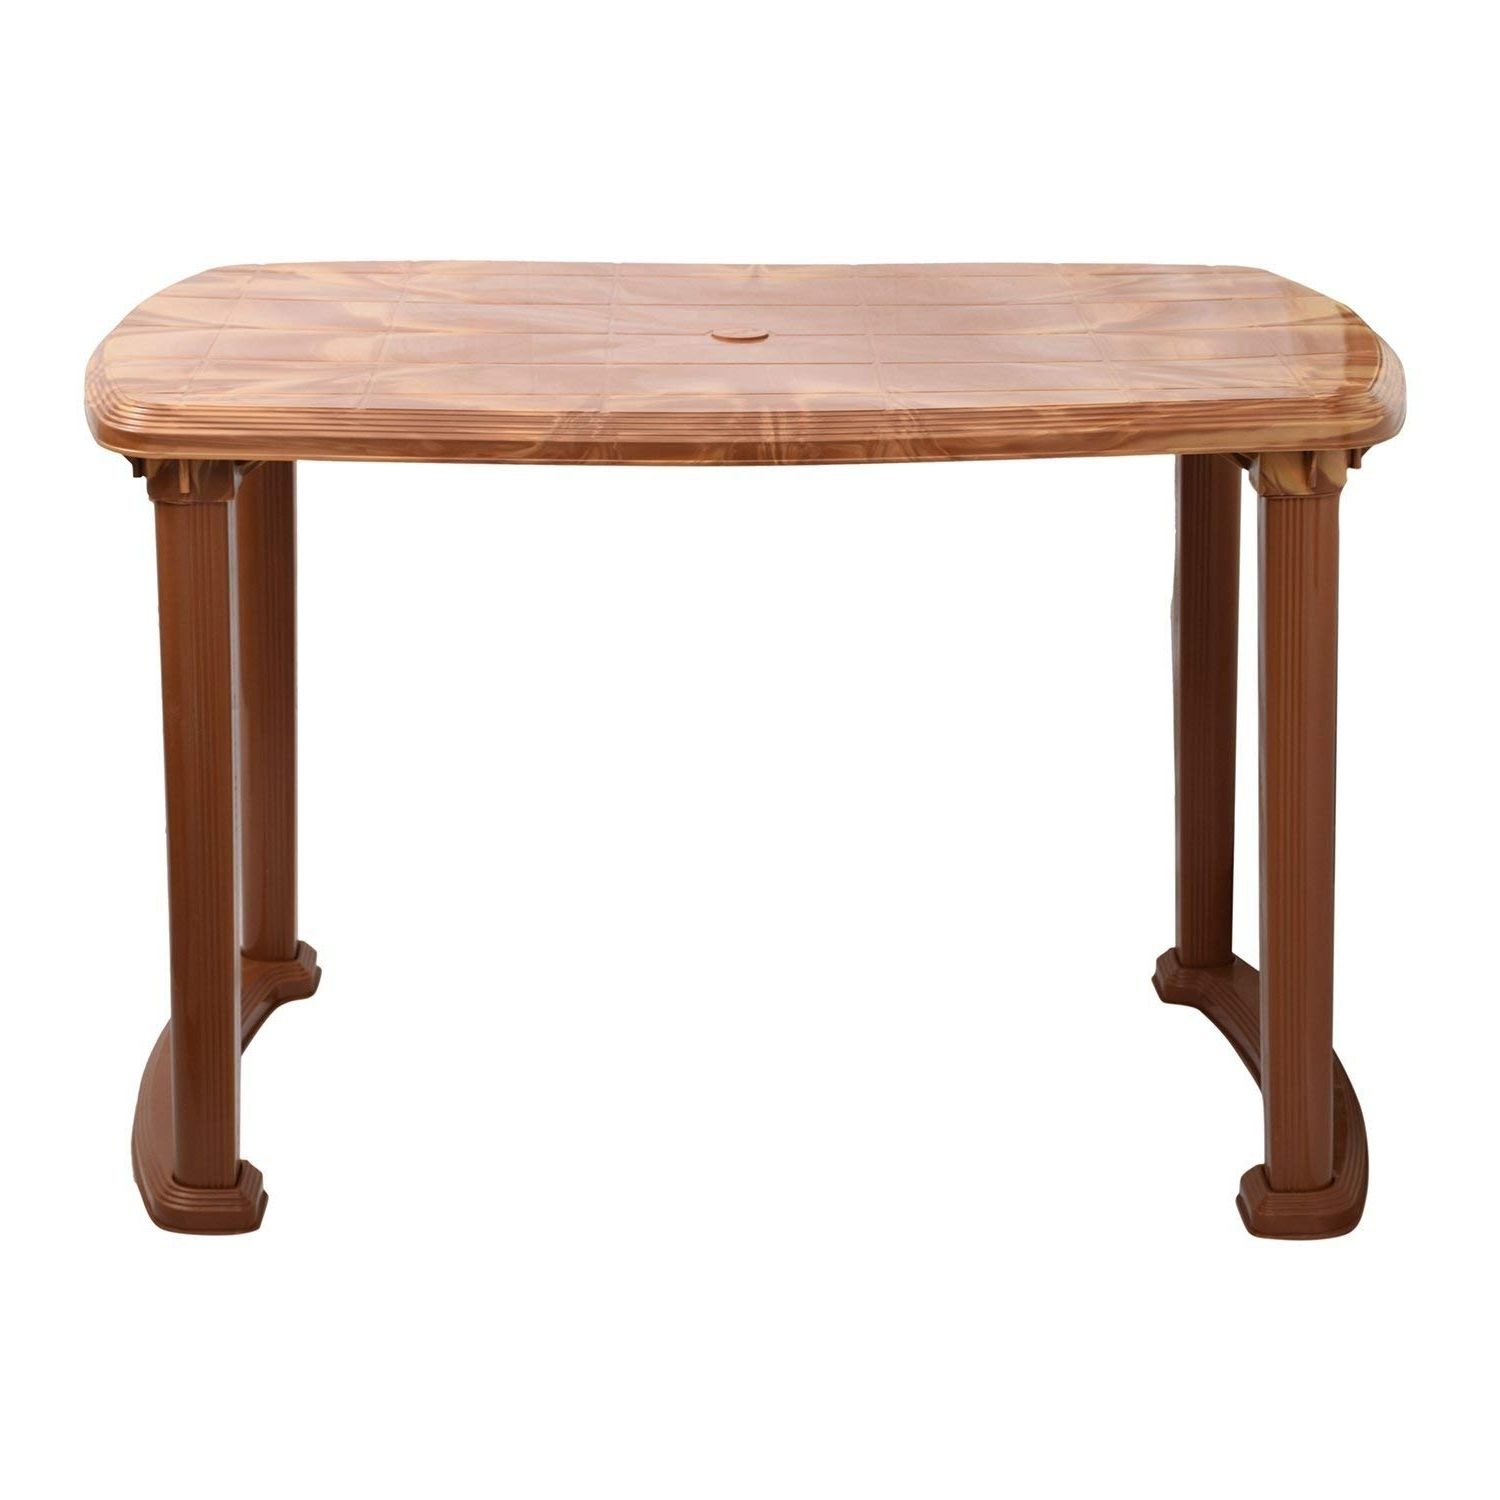 Popular Dining Tables : Buy Dining Tables Online At Low Prices In India Within Oval Folding Dining Tables (View 19 of 25)